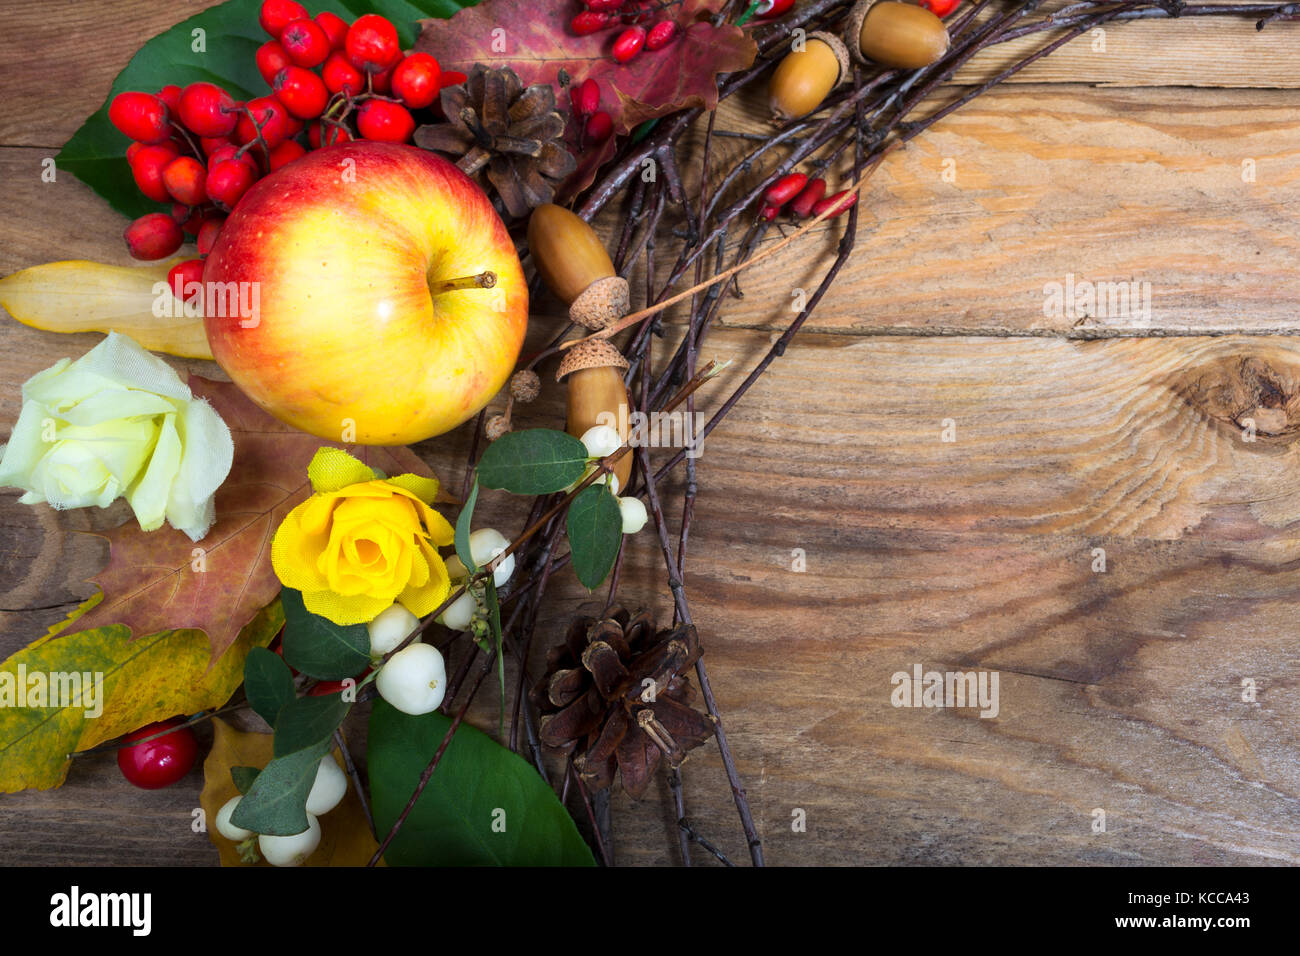 Thanksgiving background with apple, rowan berries, acorns and yellow rose on the wooden table, copy space Stock Photo